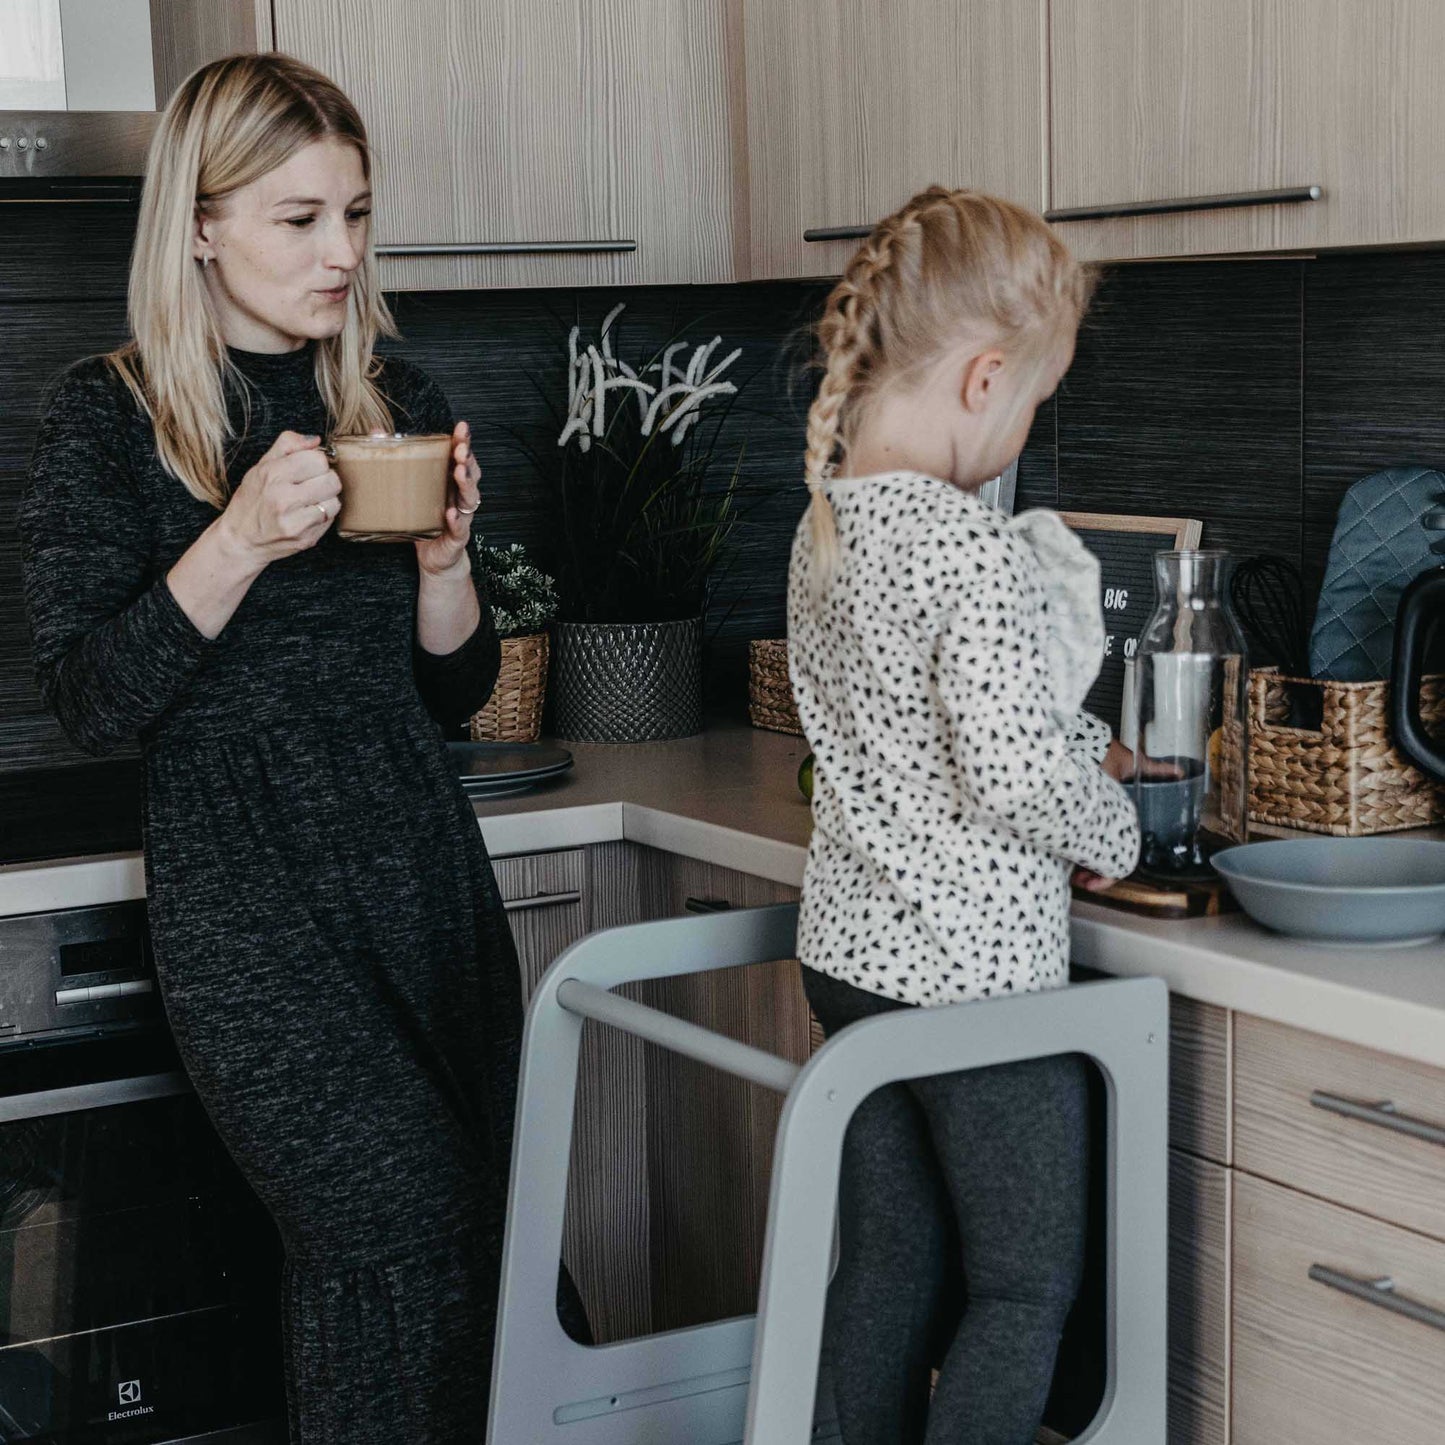 Girl cooking on a toddler step stool while mother drinks her coffee.